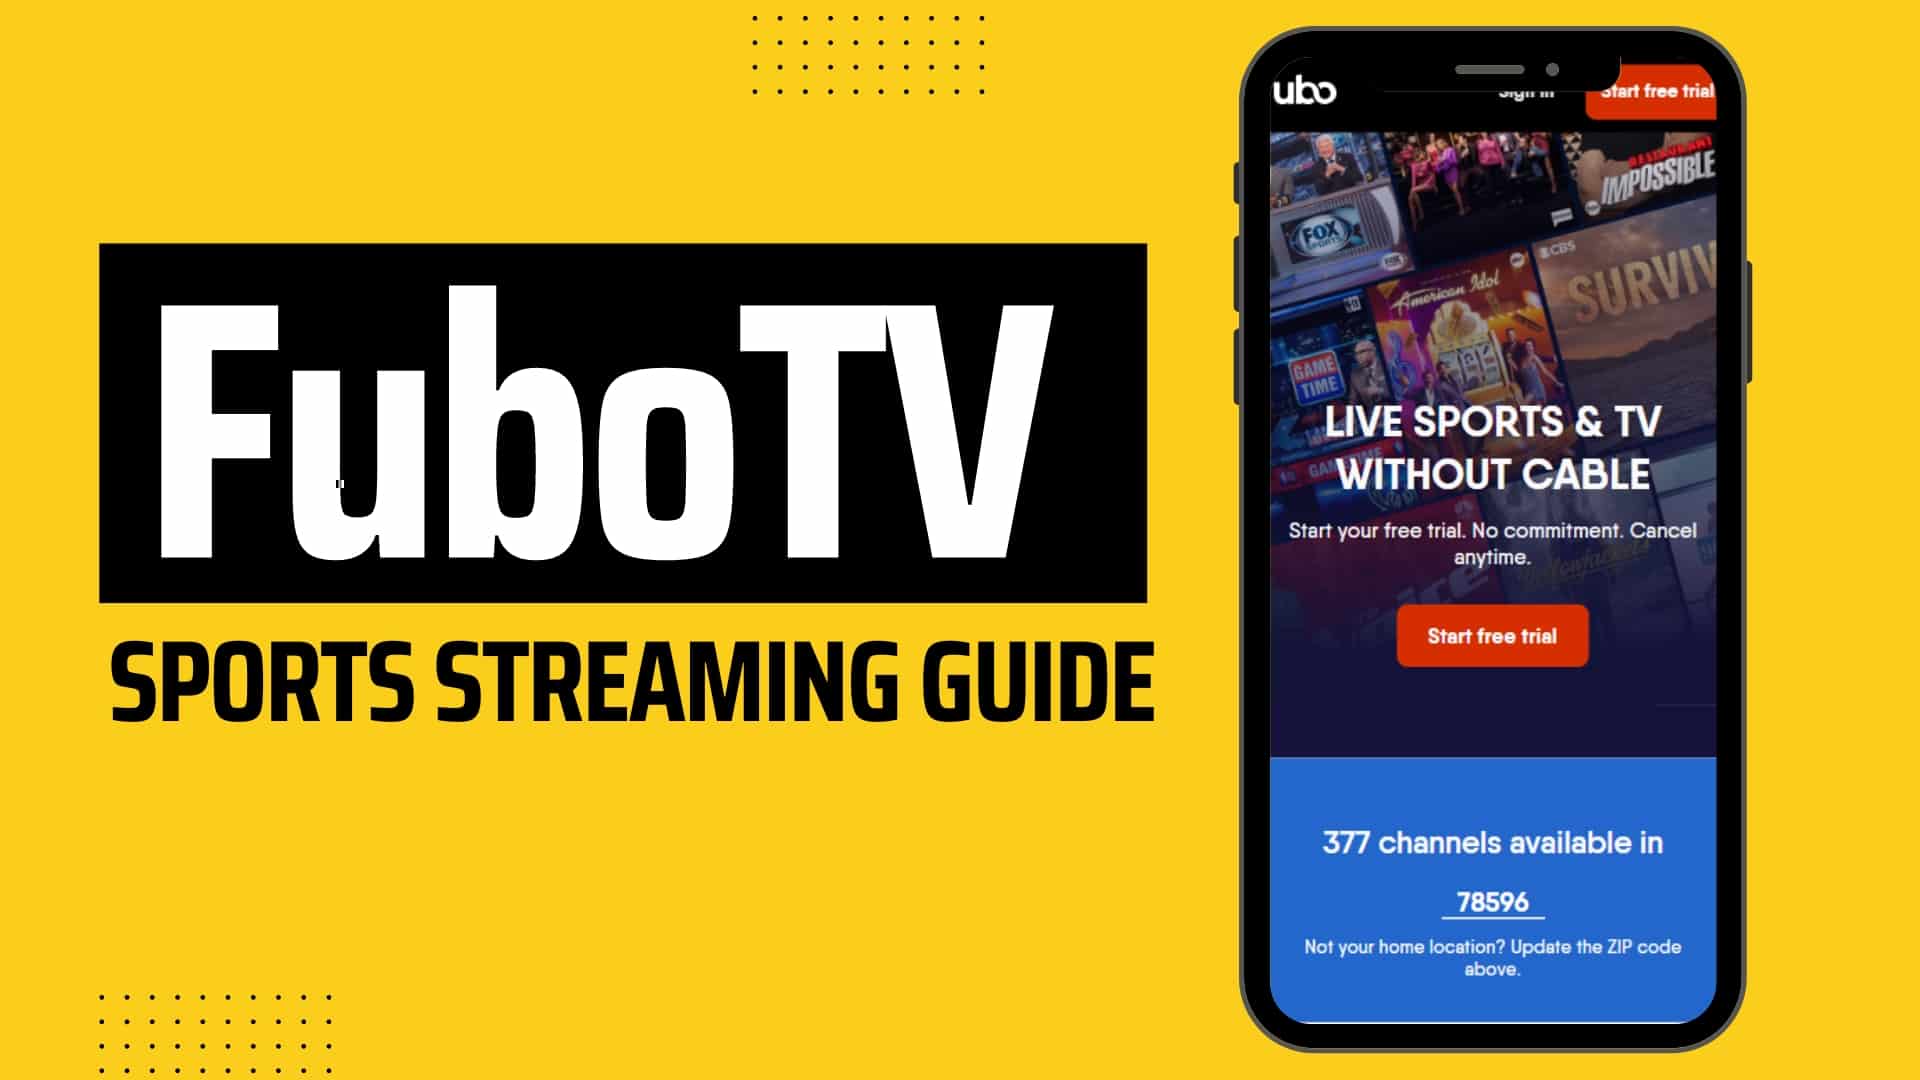 FuboTV Live Sports Streaming - Packages, Channels, Free Trial